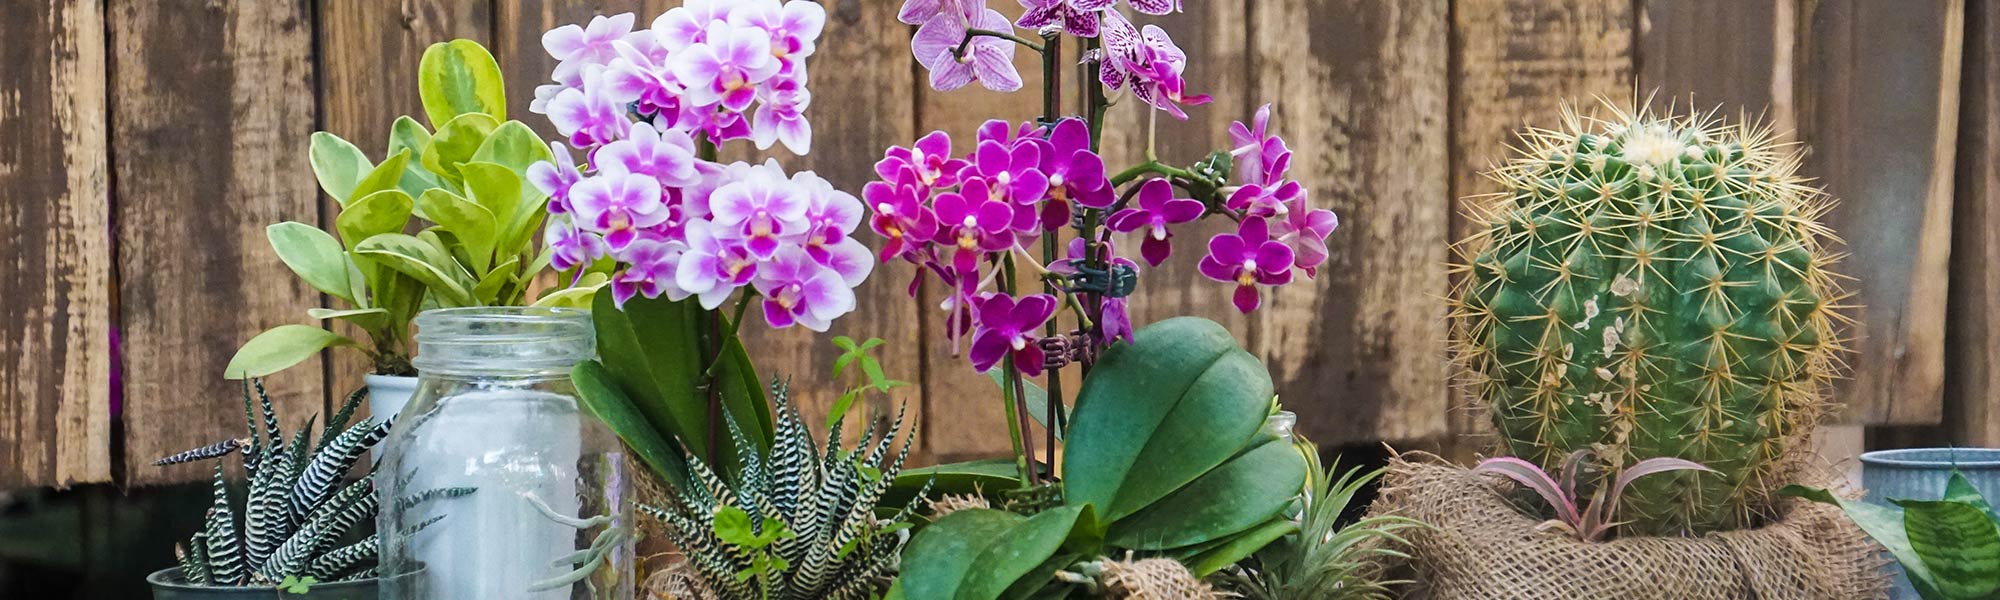 Orchid and Cactus